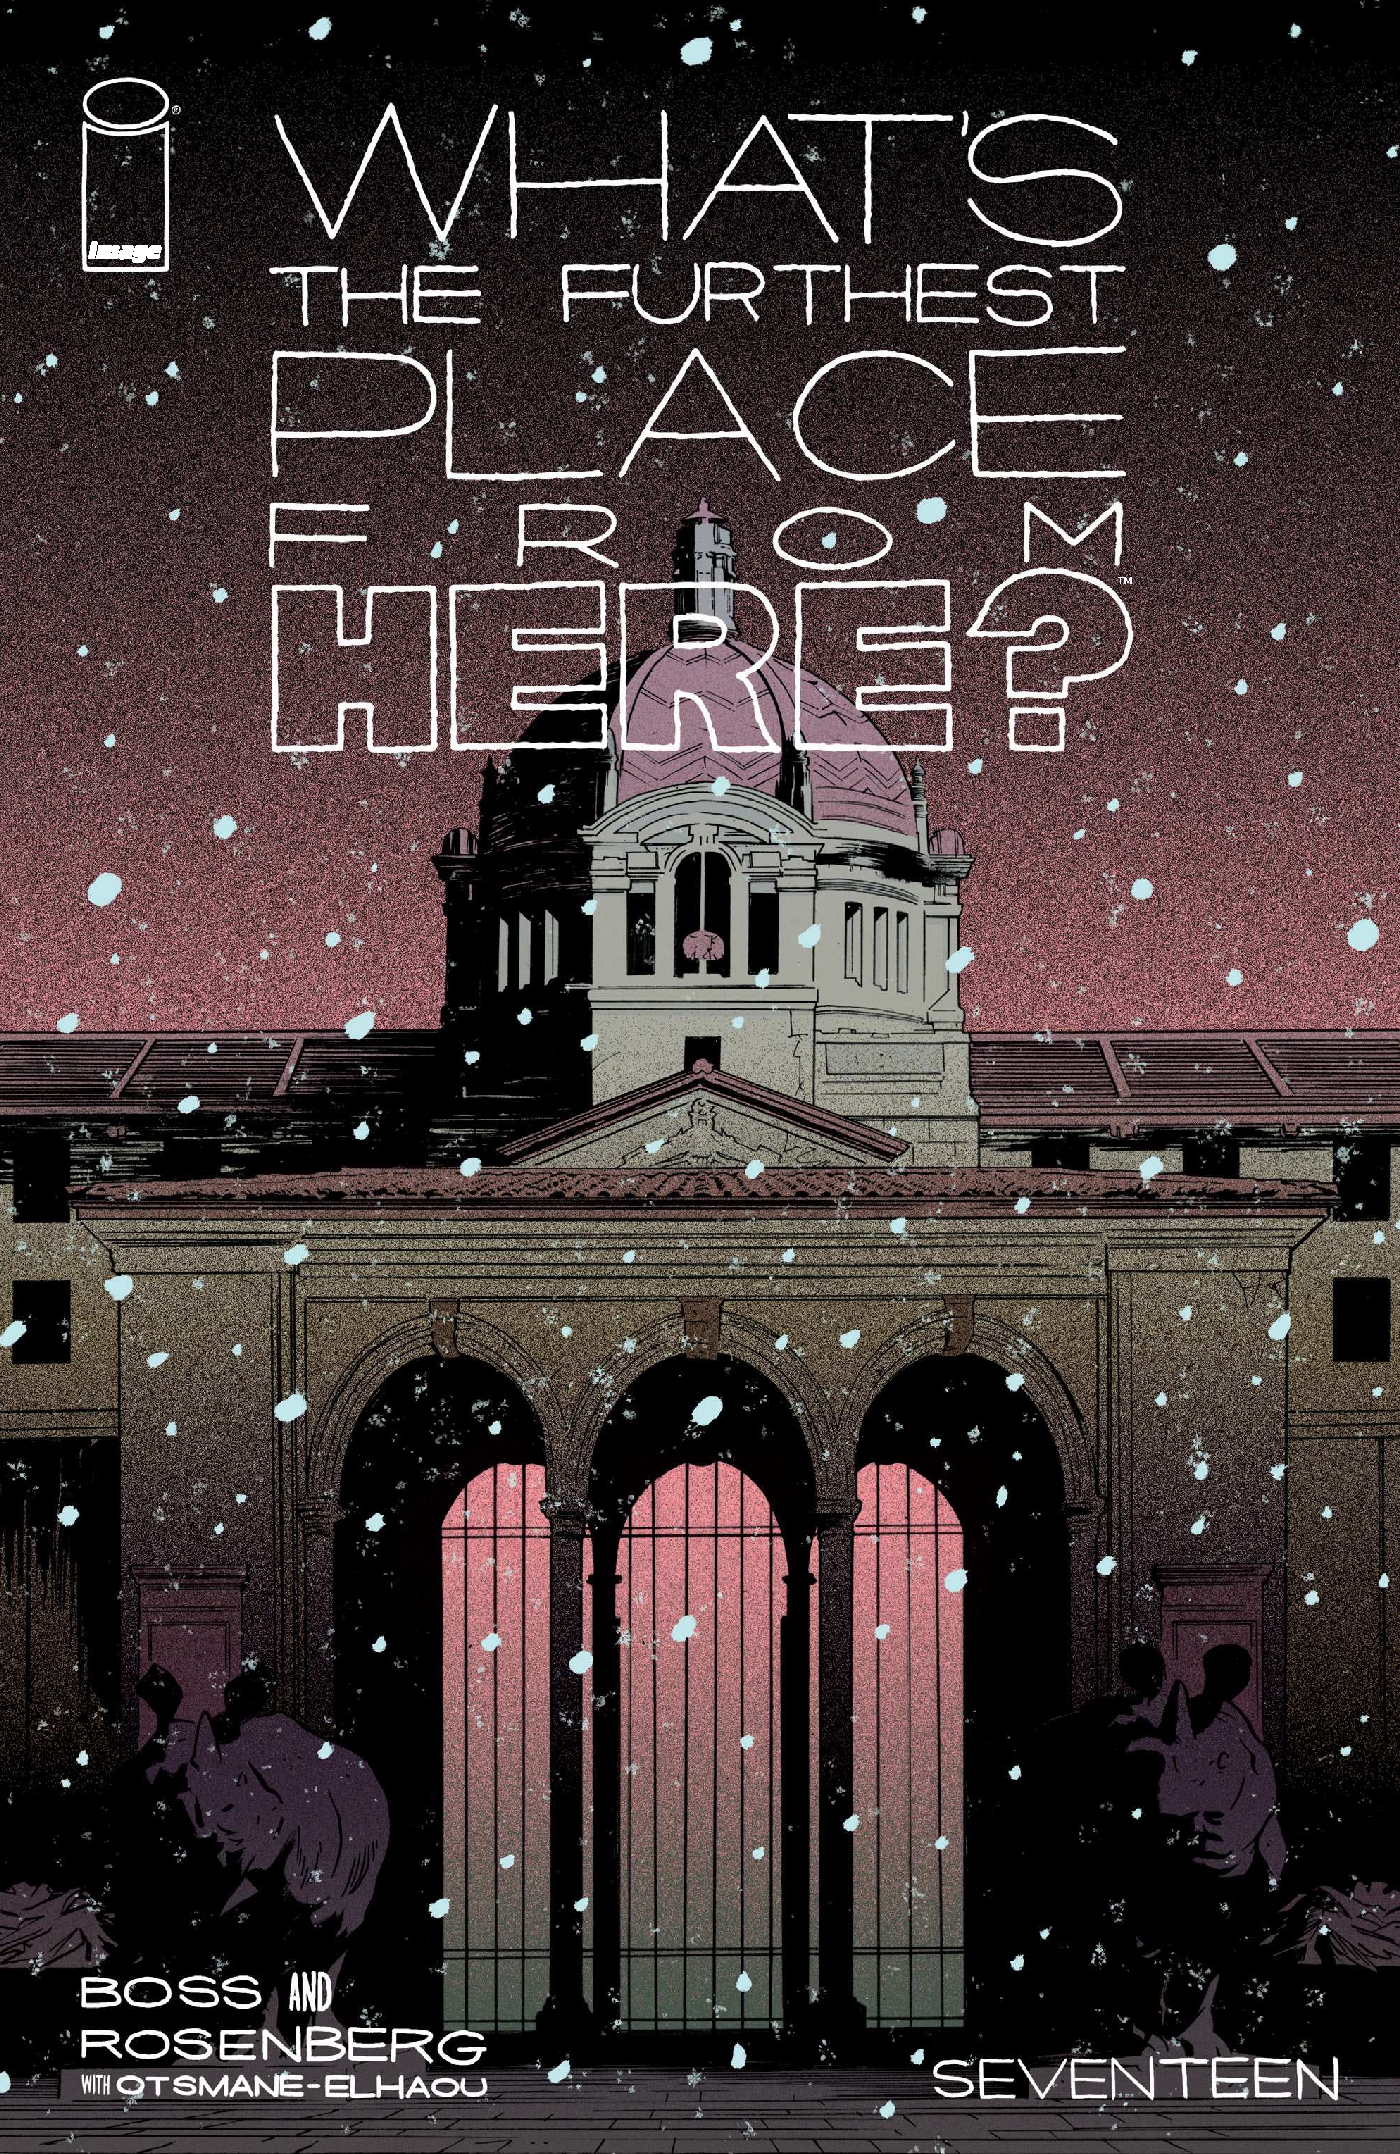 This image is the cover for the book What'S The Furthest Place From Here? #17, What's The Furthest Place From Here?